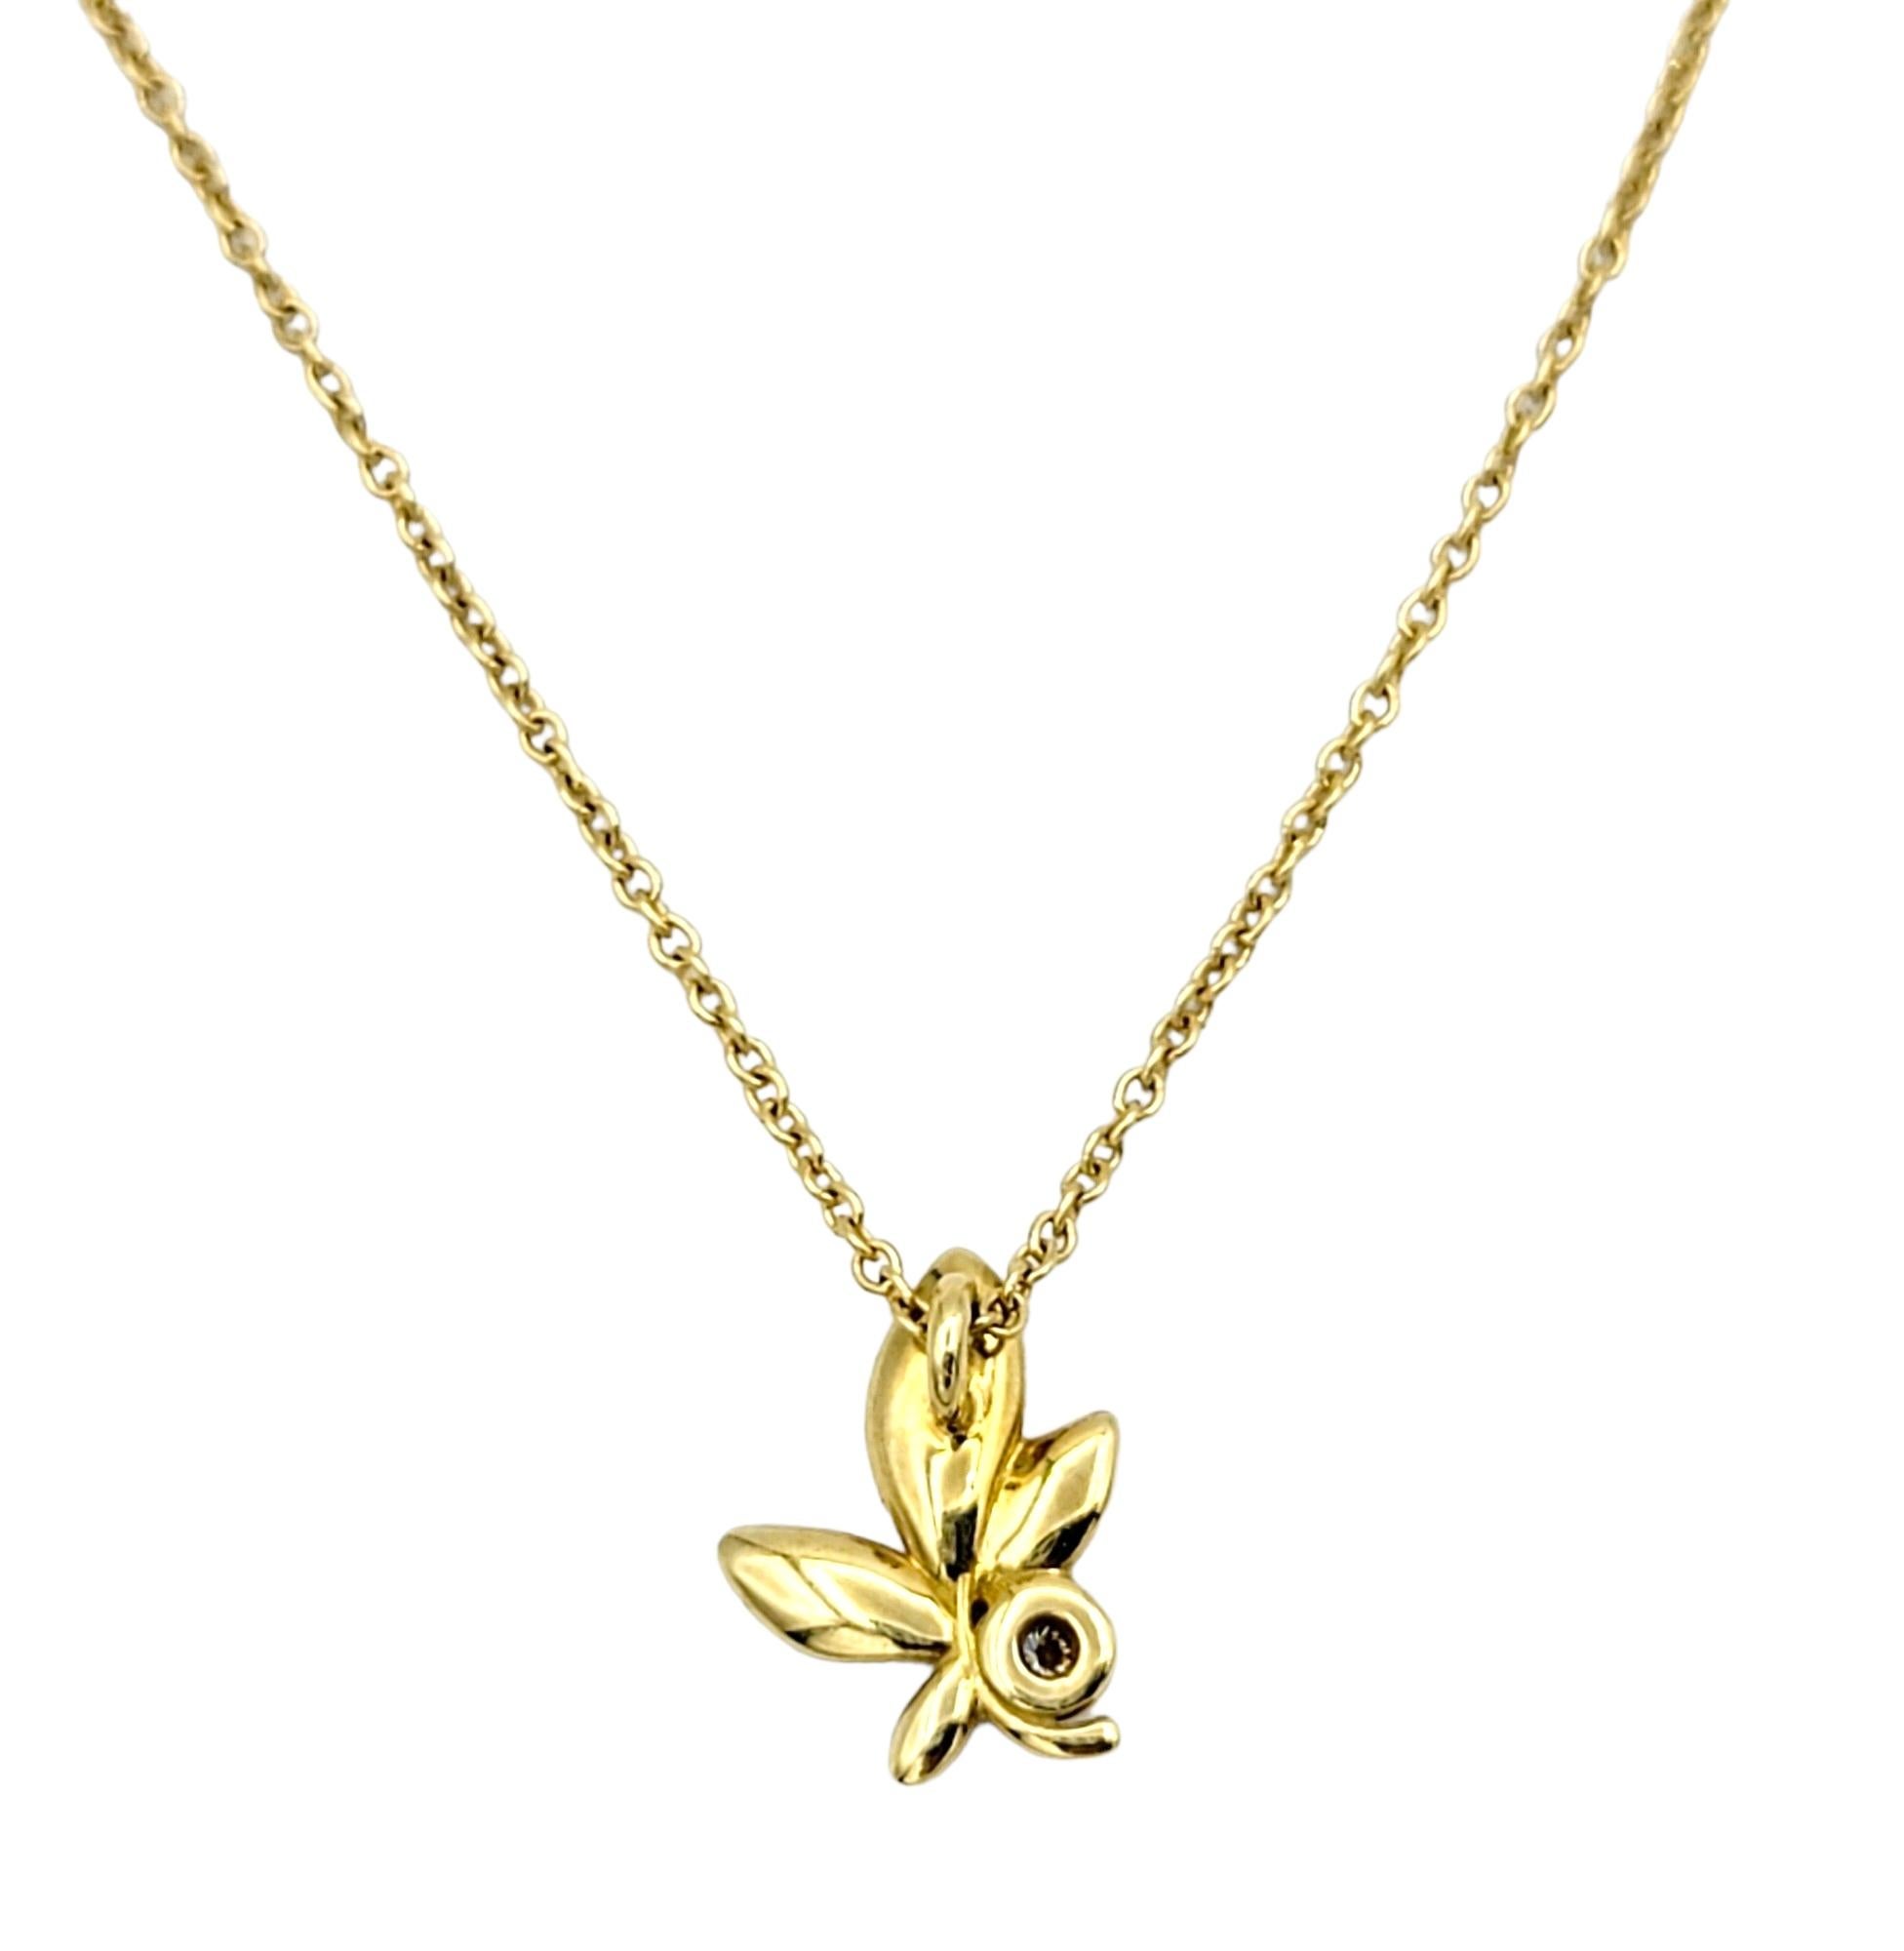 Indulge in the epitome of understated elegance with this exquisite 18 karat yellow gold Tiffany & Co. olive leaf pendant necklace designed by the renowned Paloma Picasso. This piece seamlessly blend nature's beauty with luxurious craftsmanship,